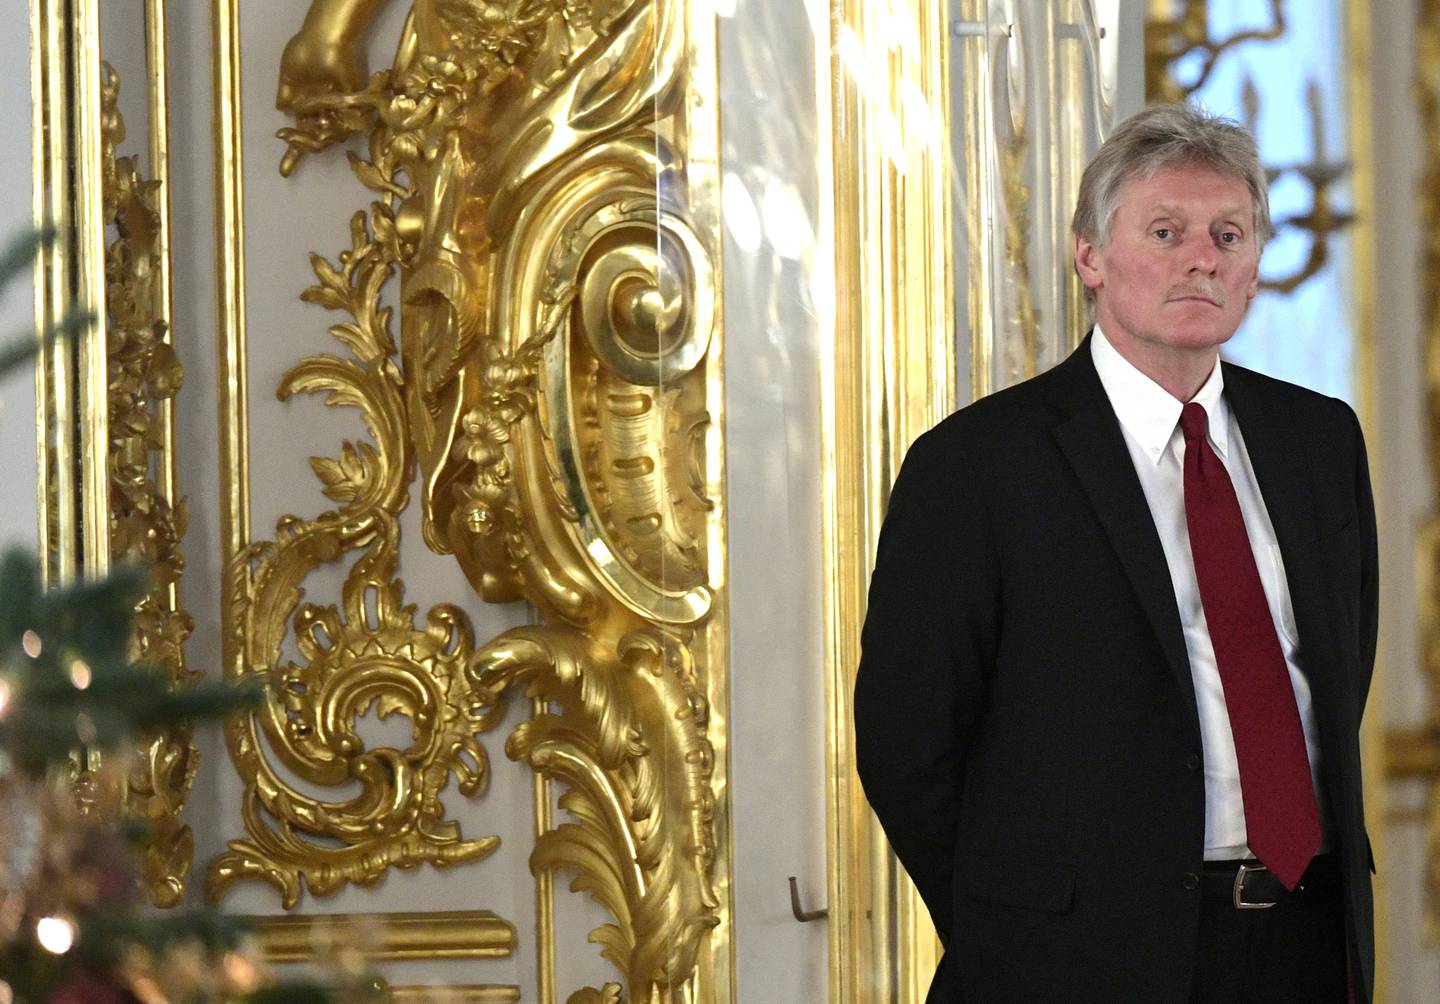 Kremlin spokesman Dmitry Peskov looks on during a visit of CIS heads of state to the Catherine Palace at the Tsarskoye Selo State Museum and Reserve in Saint Petersburg, Russia December 26, 2023. Sputnik/Alexei Danichev/Kremlin via REUTERS ATTENTION EDITORS - THIS IMAGE WAS PROVIDED BY A THIRD PARTY.